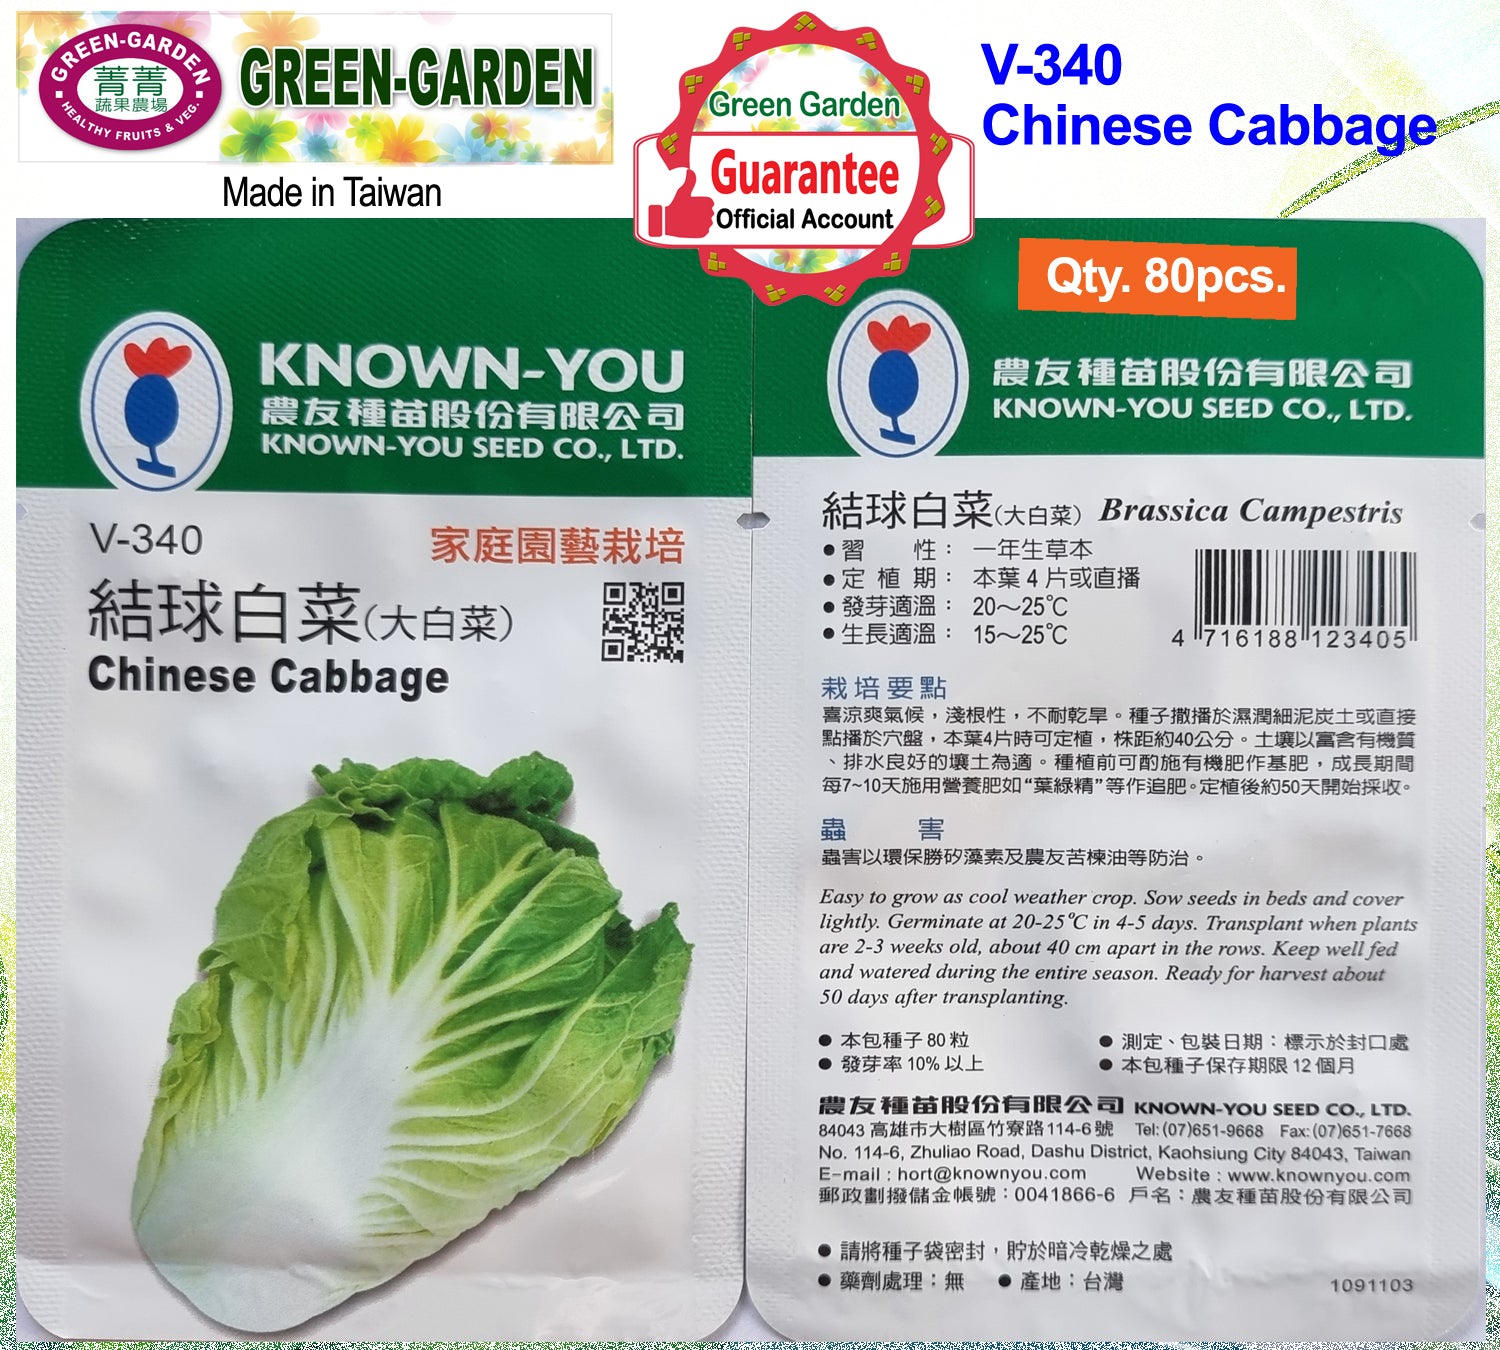 Known You Vegetable Seeds (V-340 Chinese Cabbage)